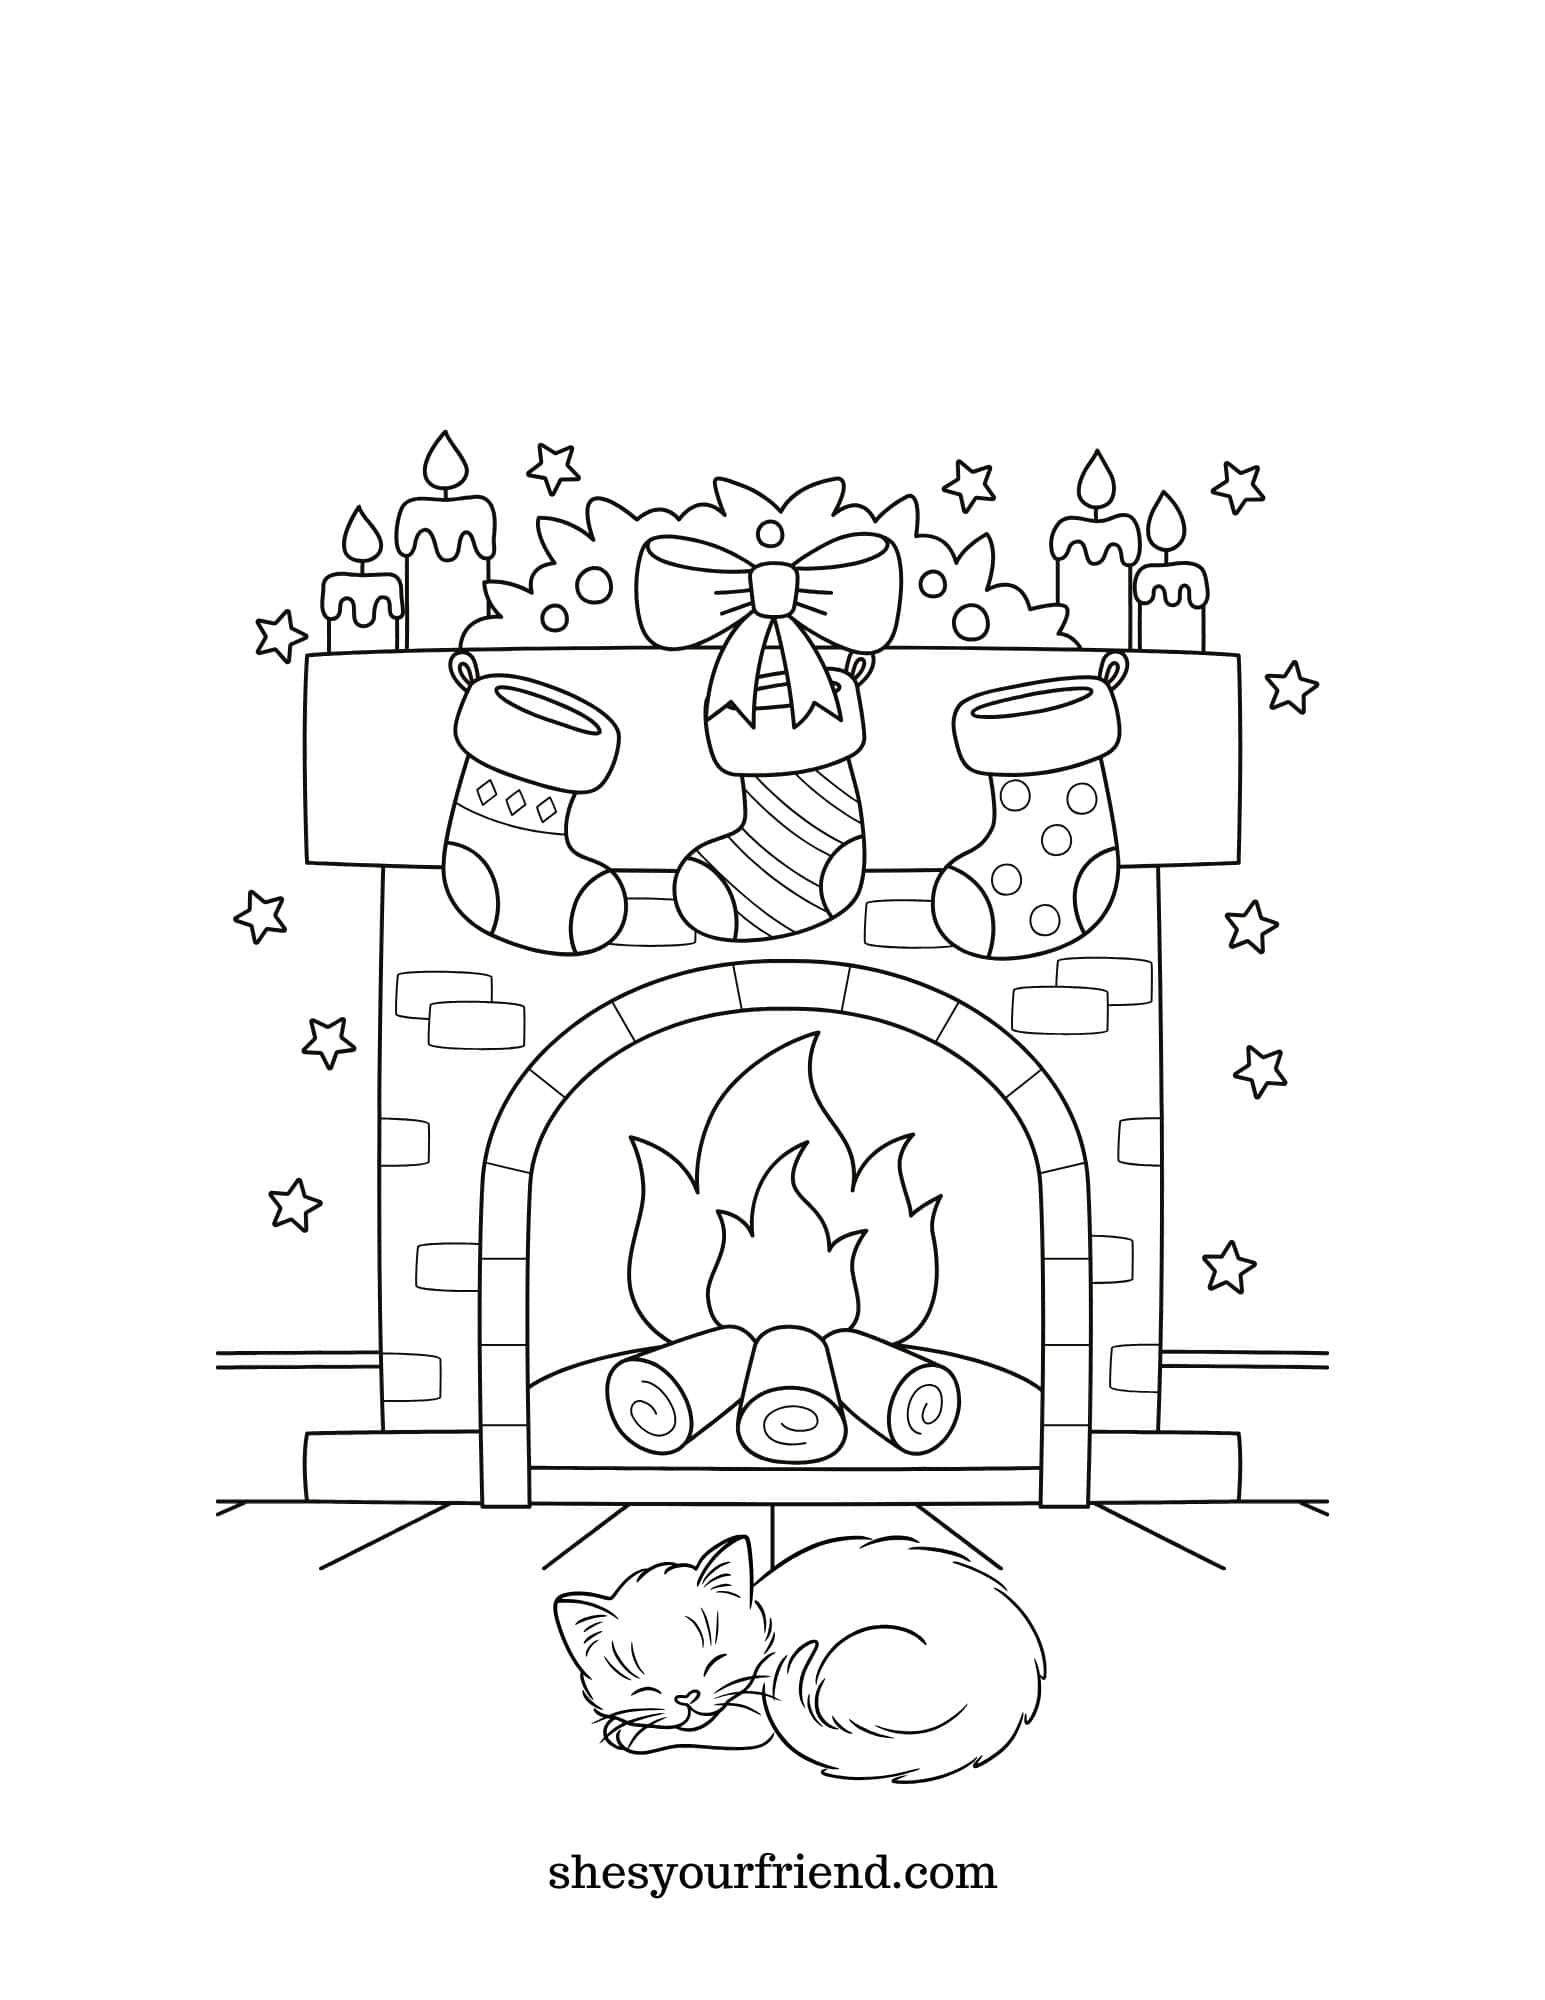 a coloring page with a kitten sleeping by the fireplace